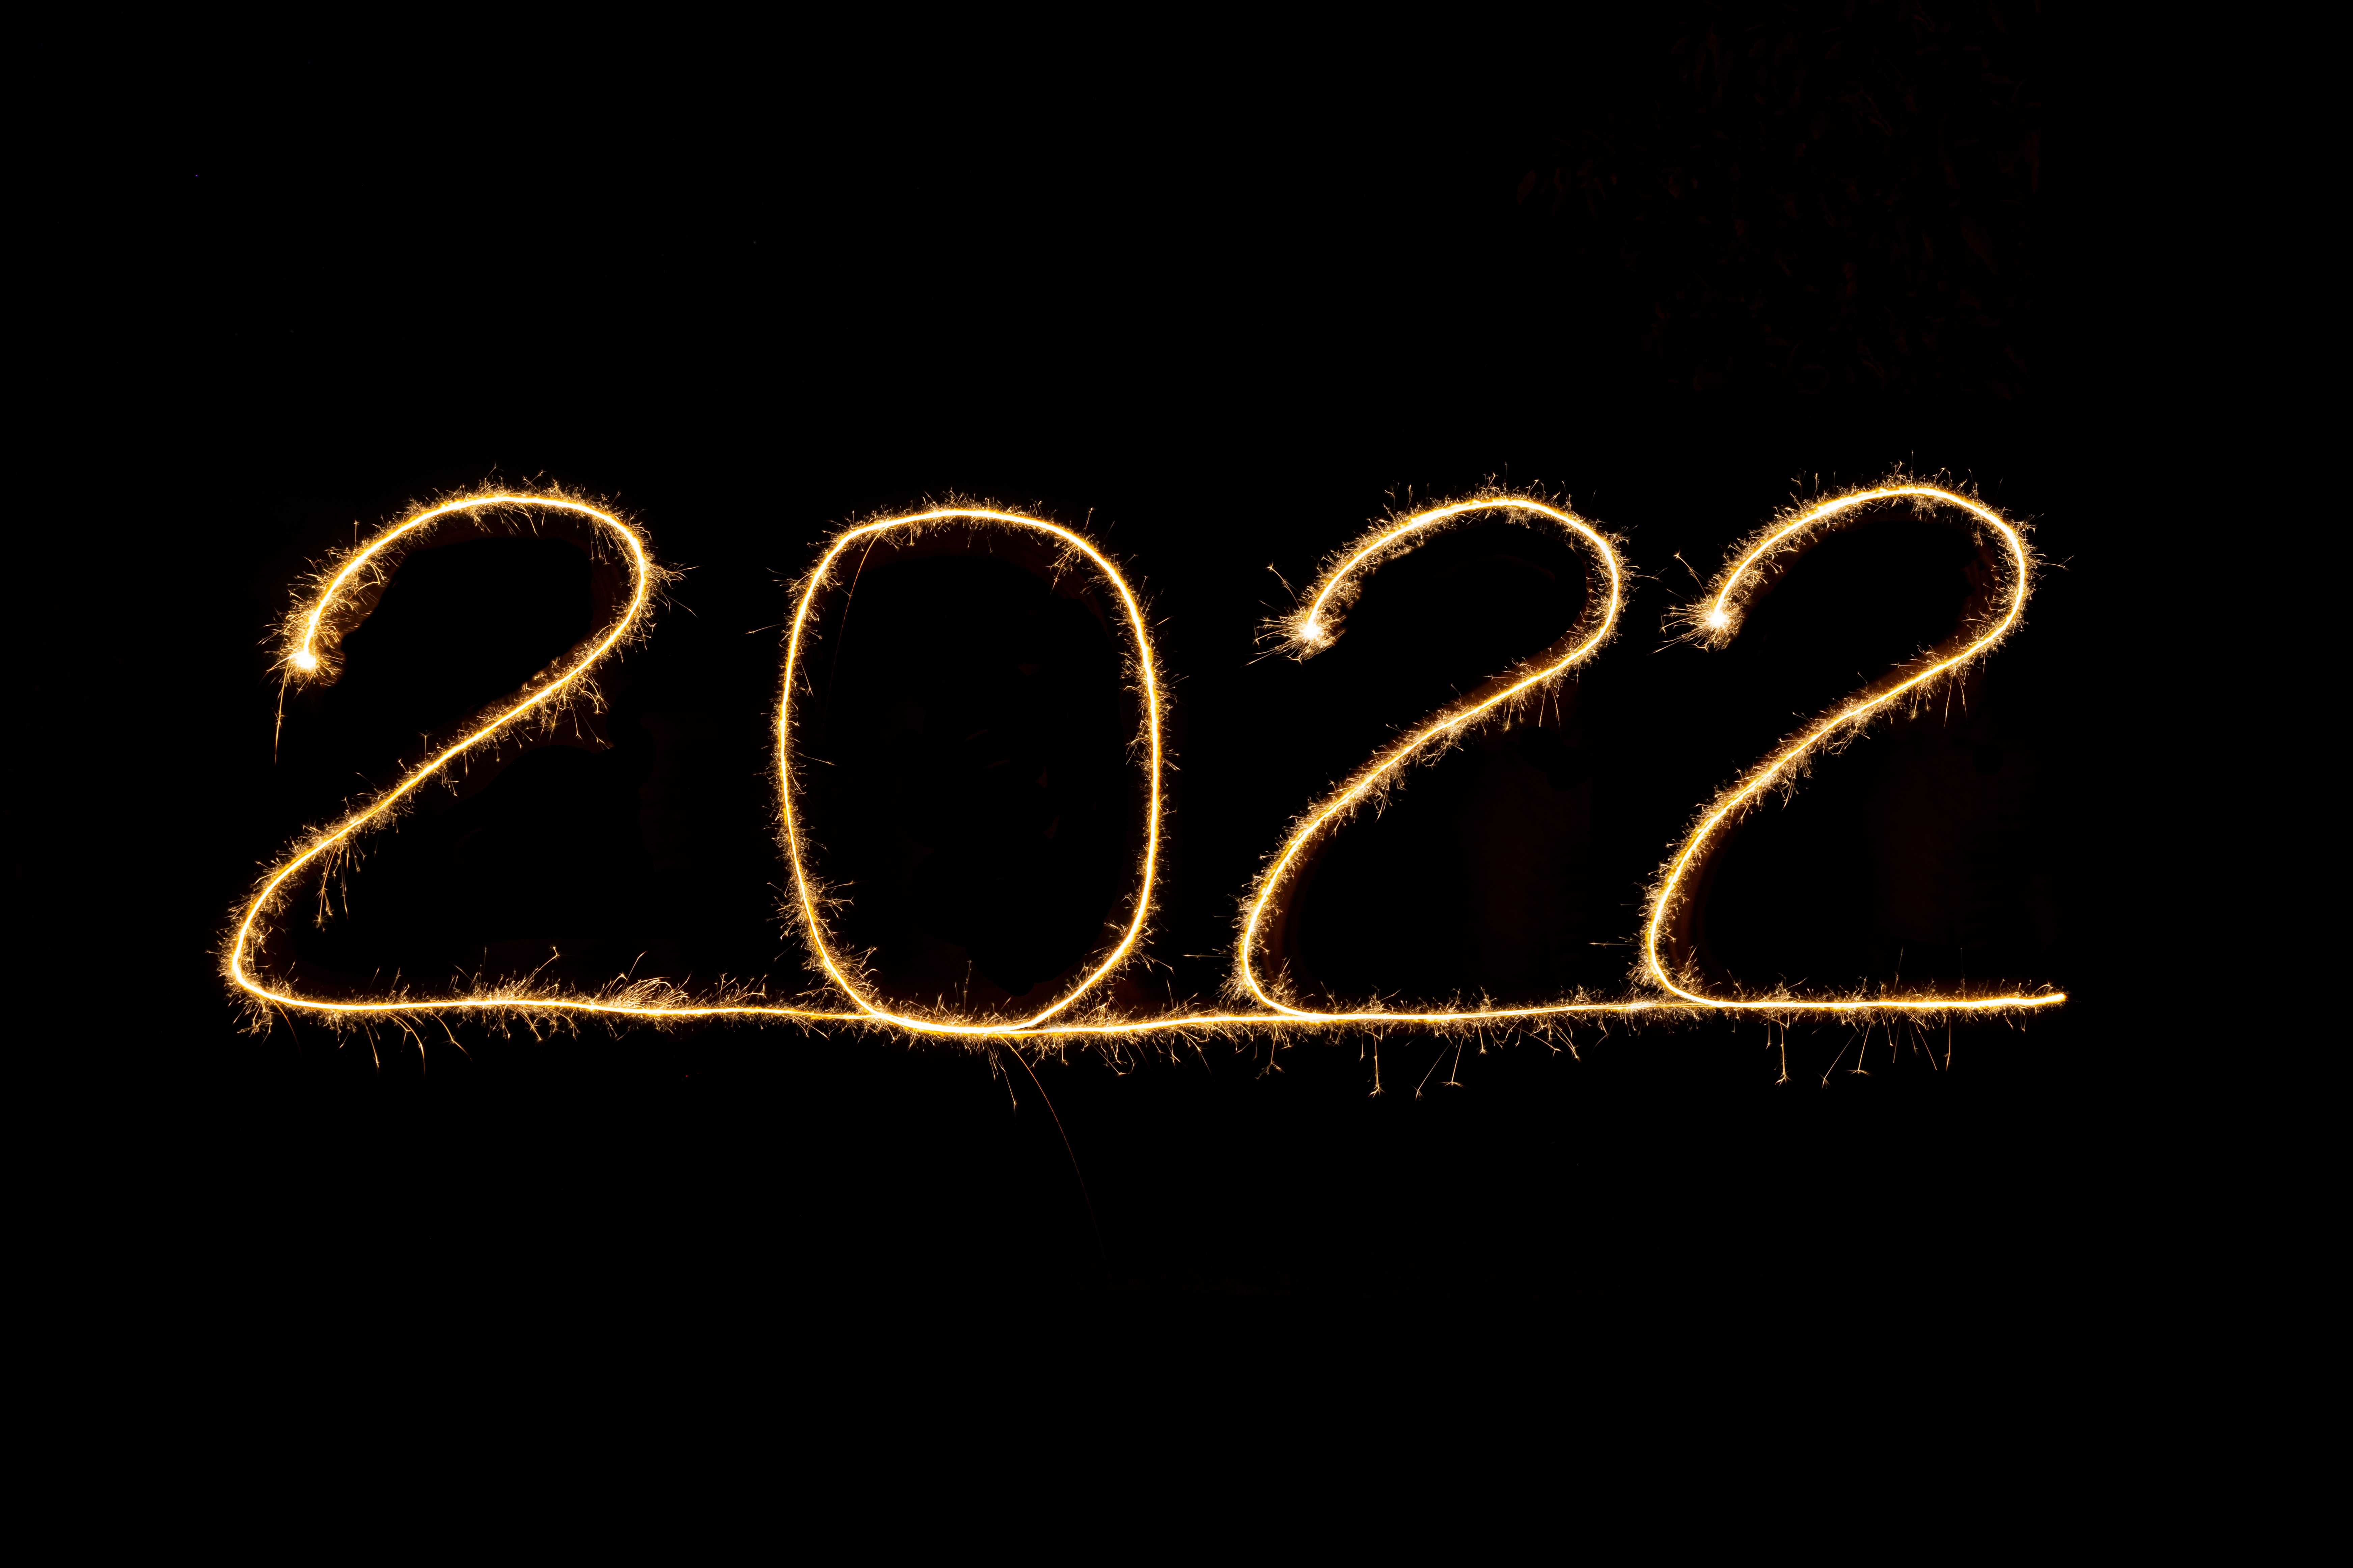 shows 2022 in firework-style